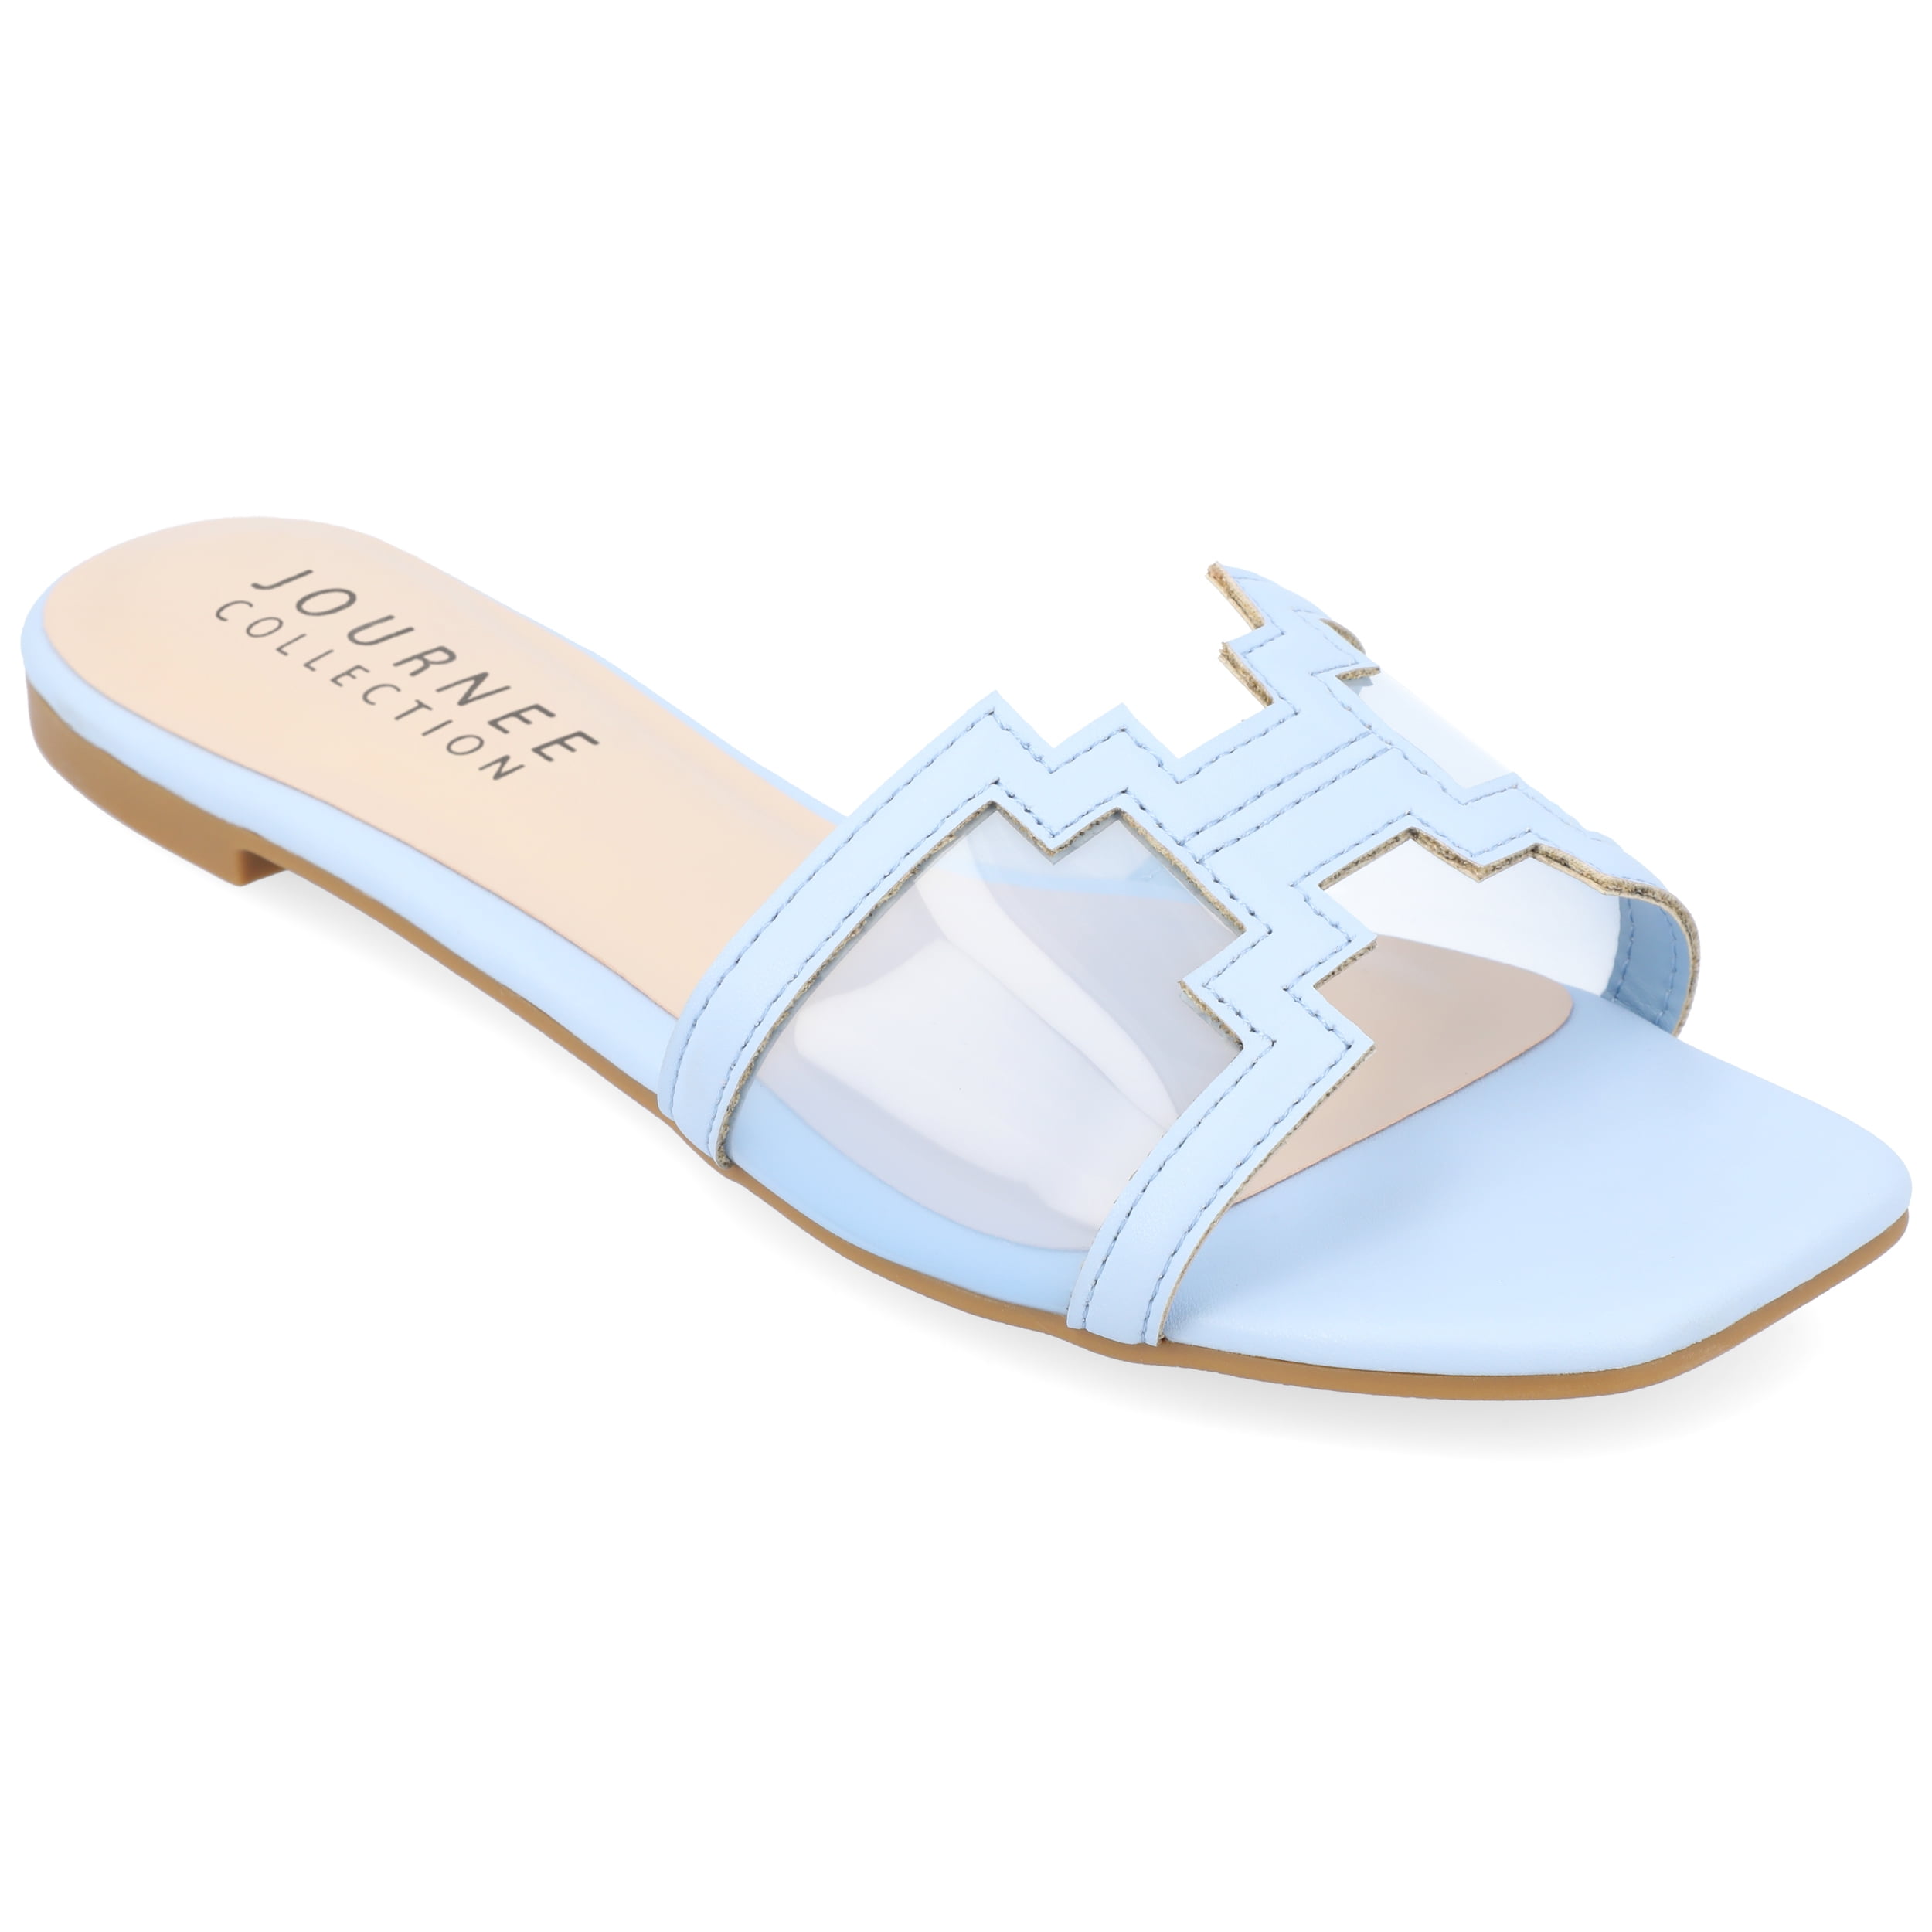 Louis Vuitton White Jelly Wedge Sandals